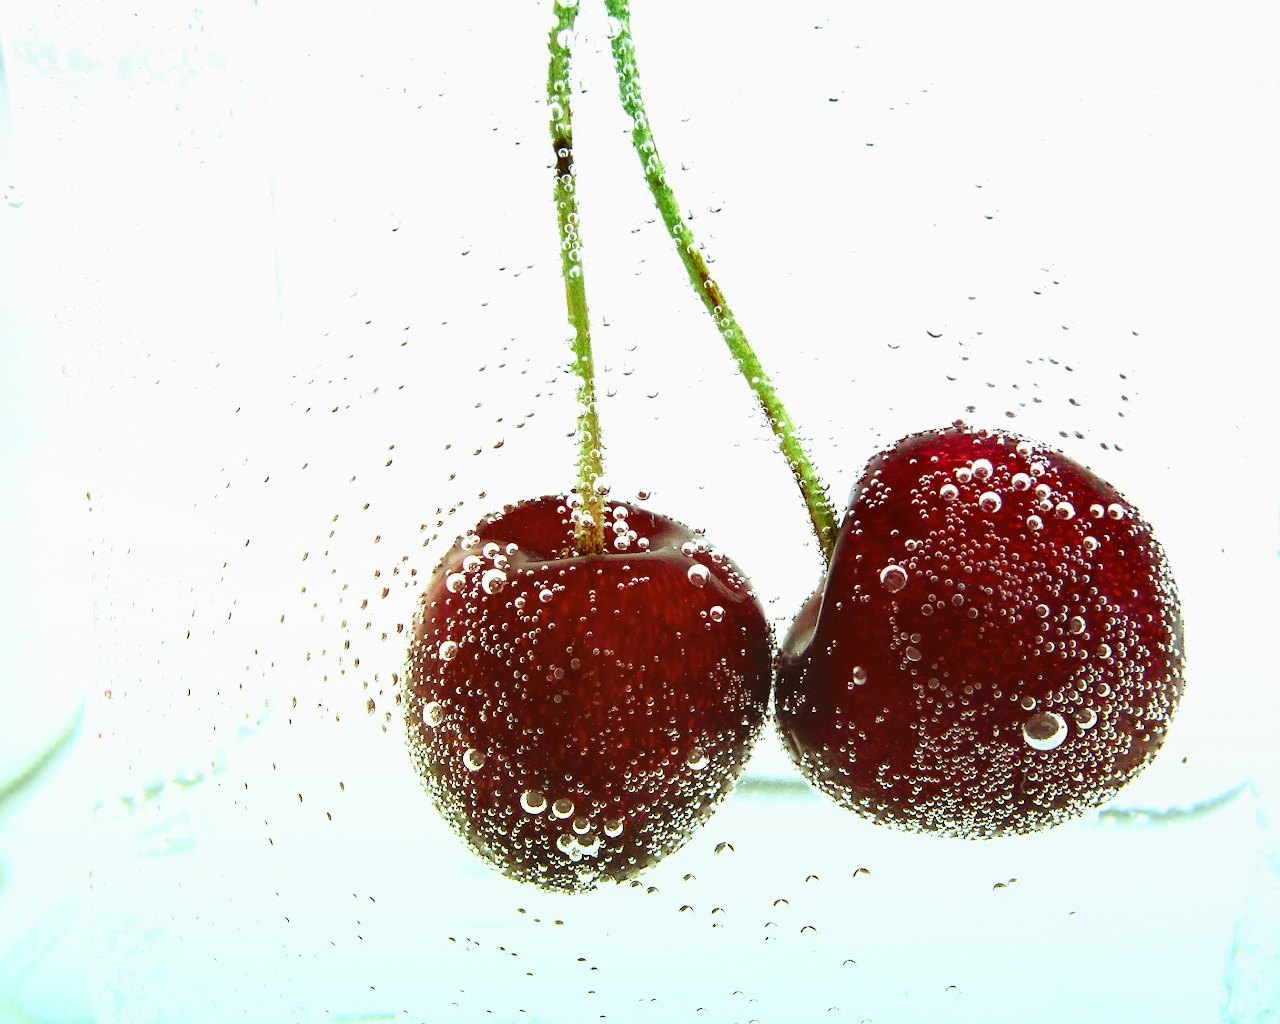 Two Cherries With Water - HD Wallpaper 